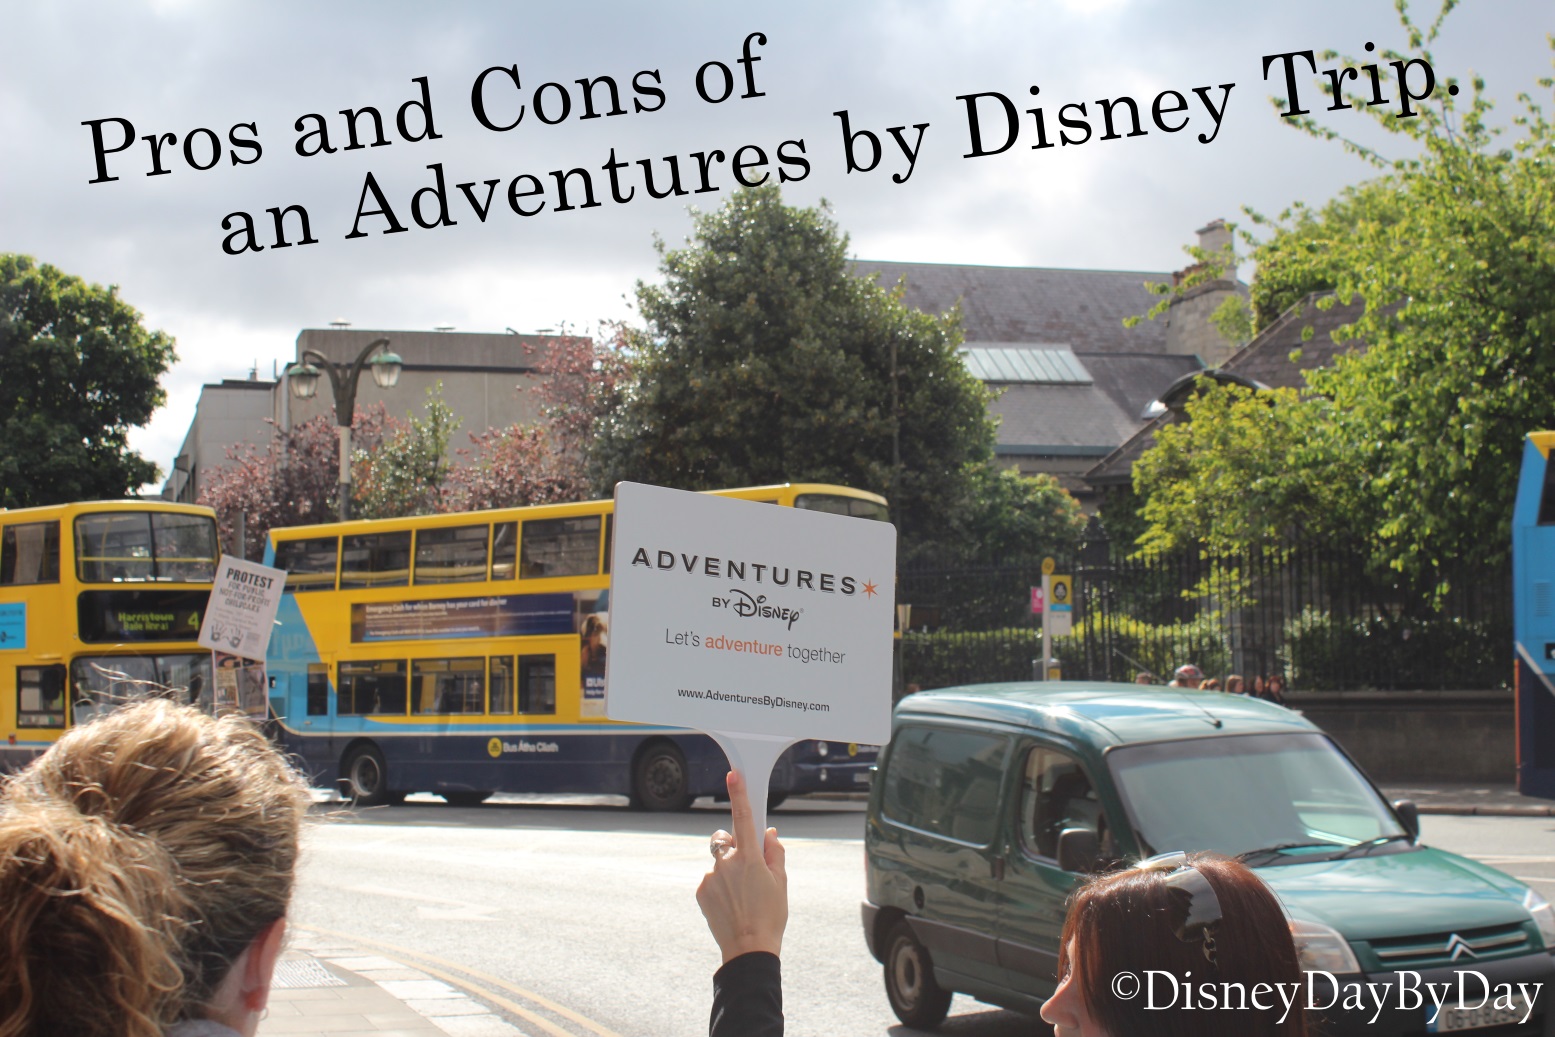 The Pros and Cons of an Adventures by Disney Trip